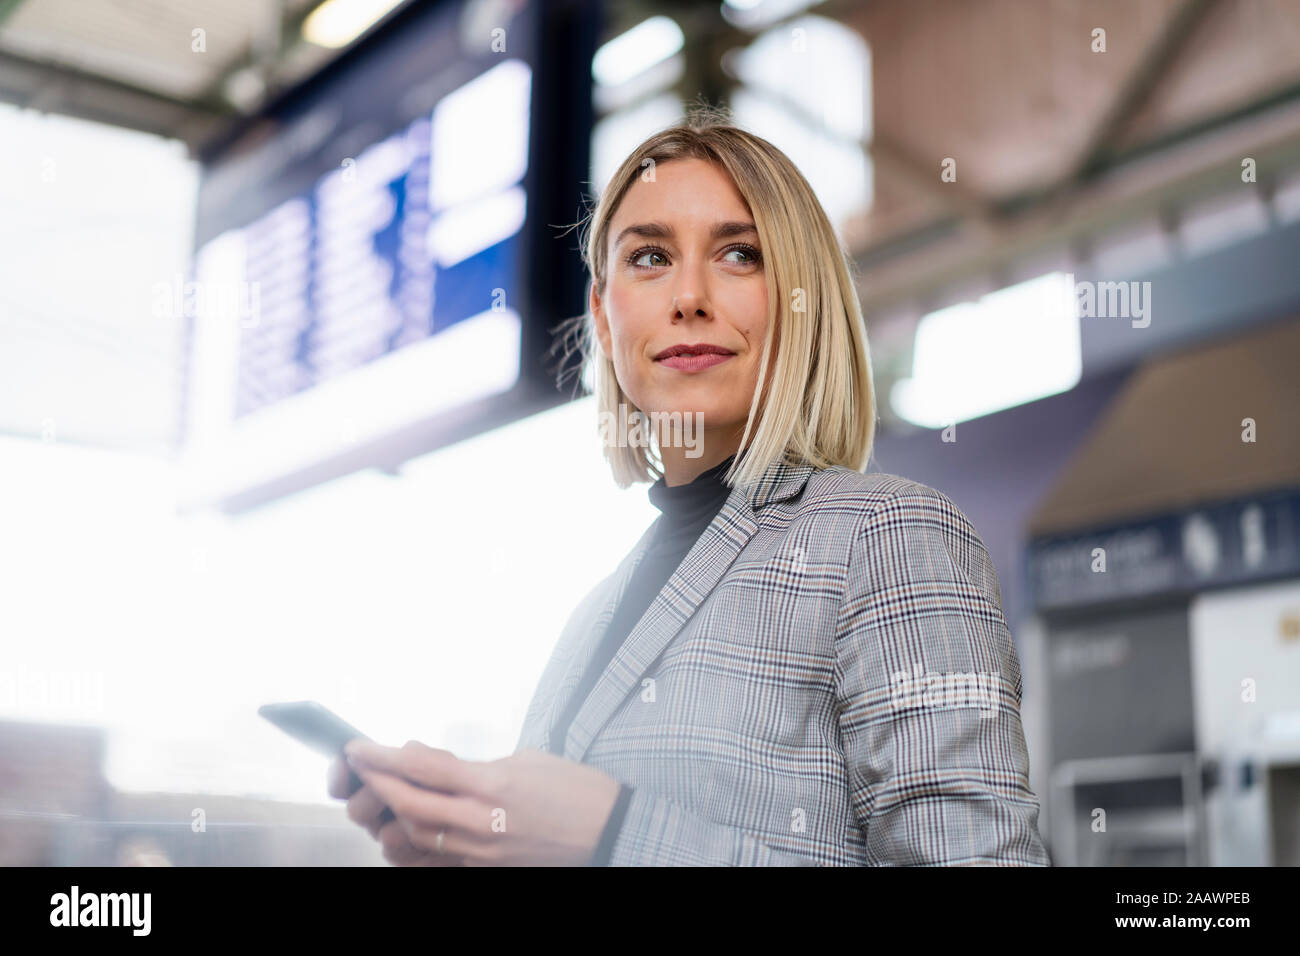 Young businesswoman with mobile phone at the train station Stock Photo